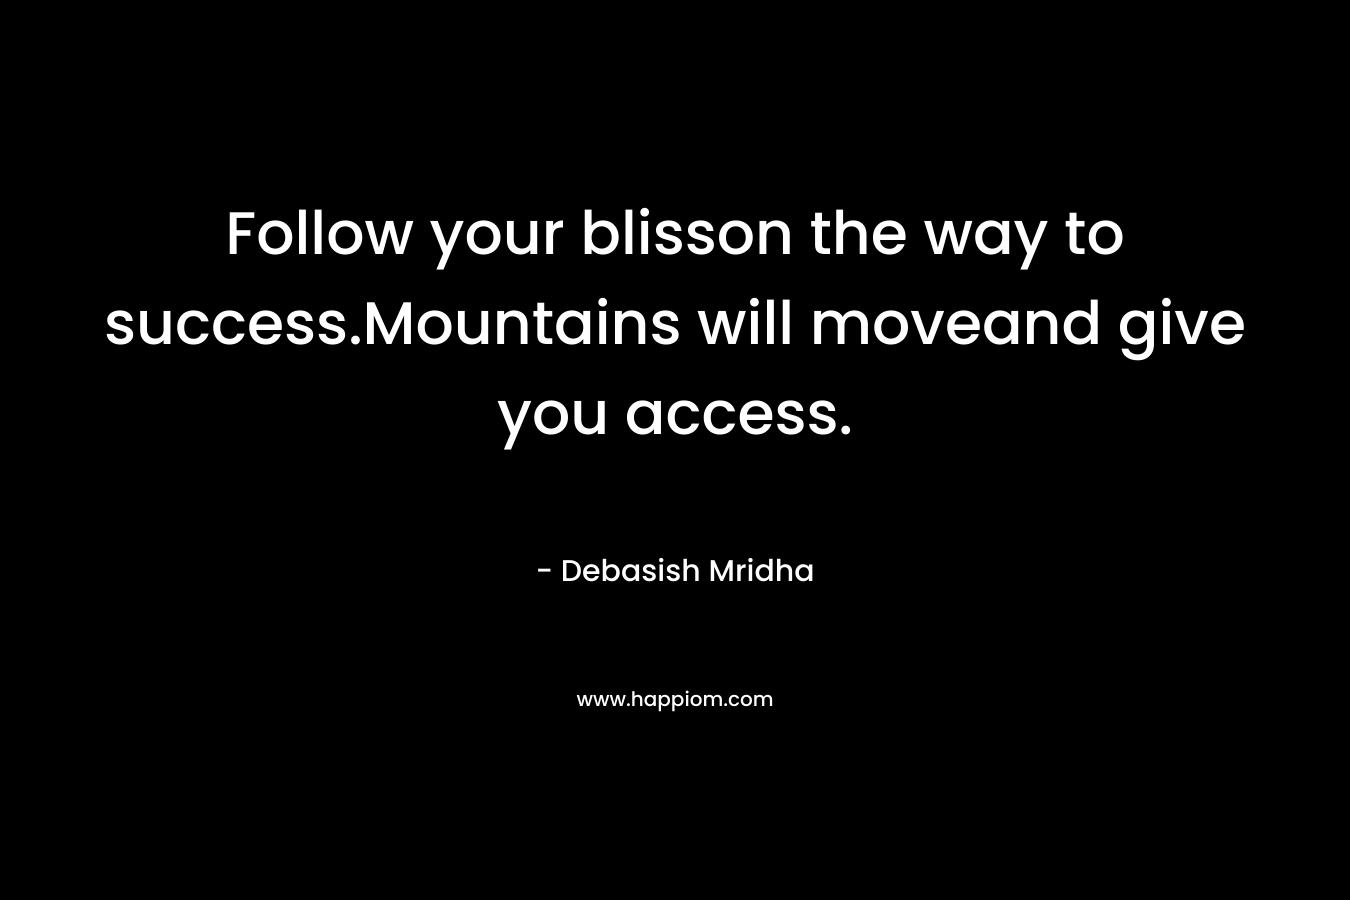 Follow your blisson the way to success.Mountains will moveand give you access. – Debasish Mridha